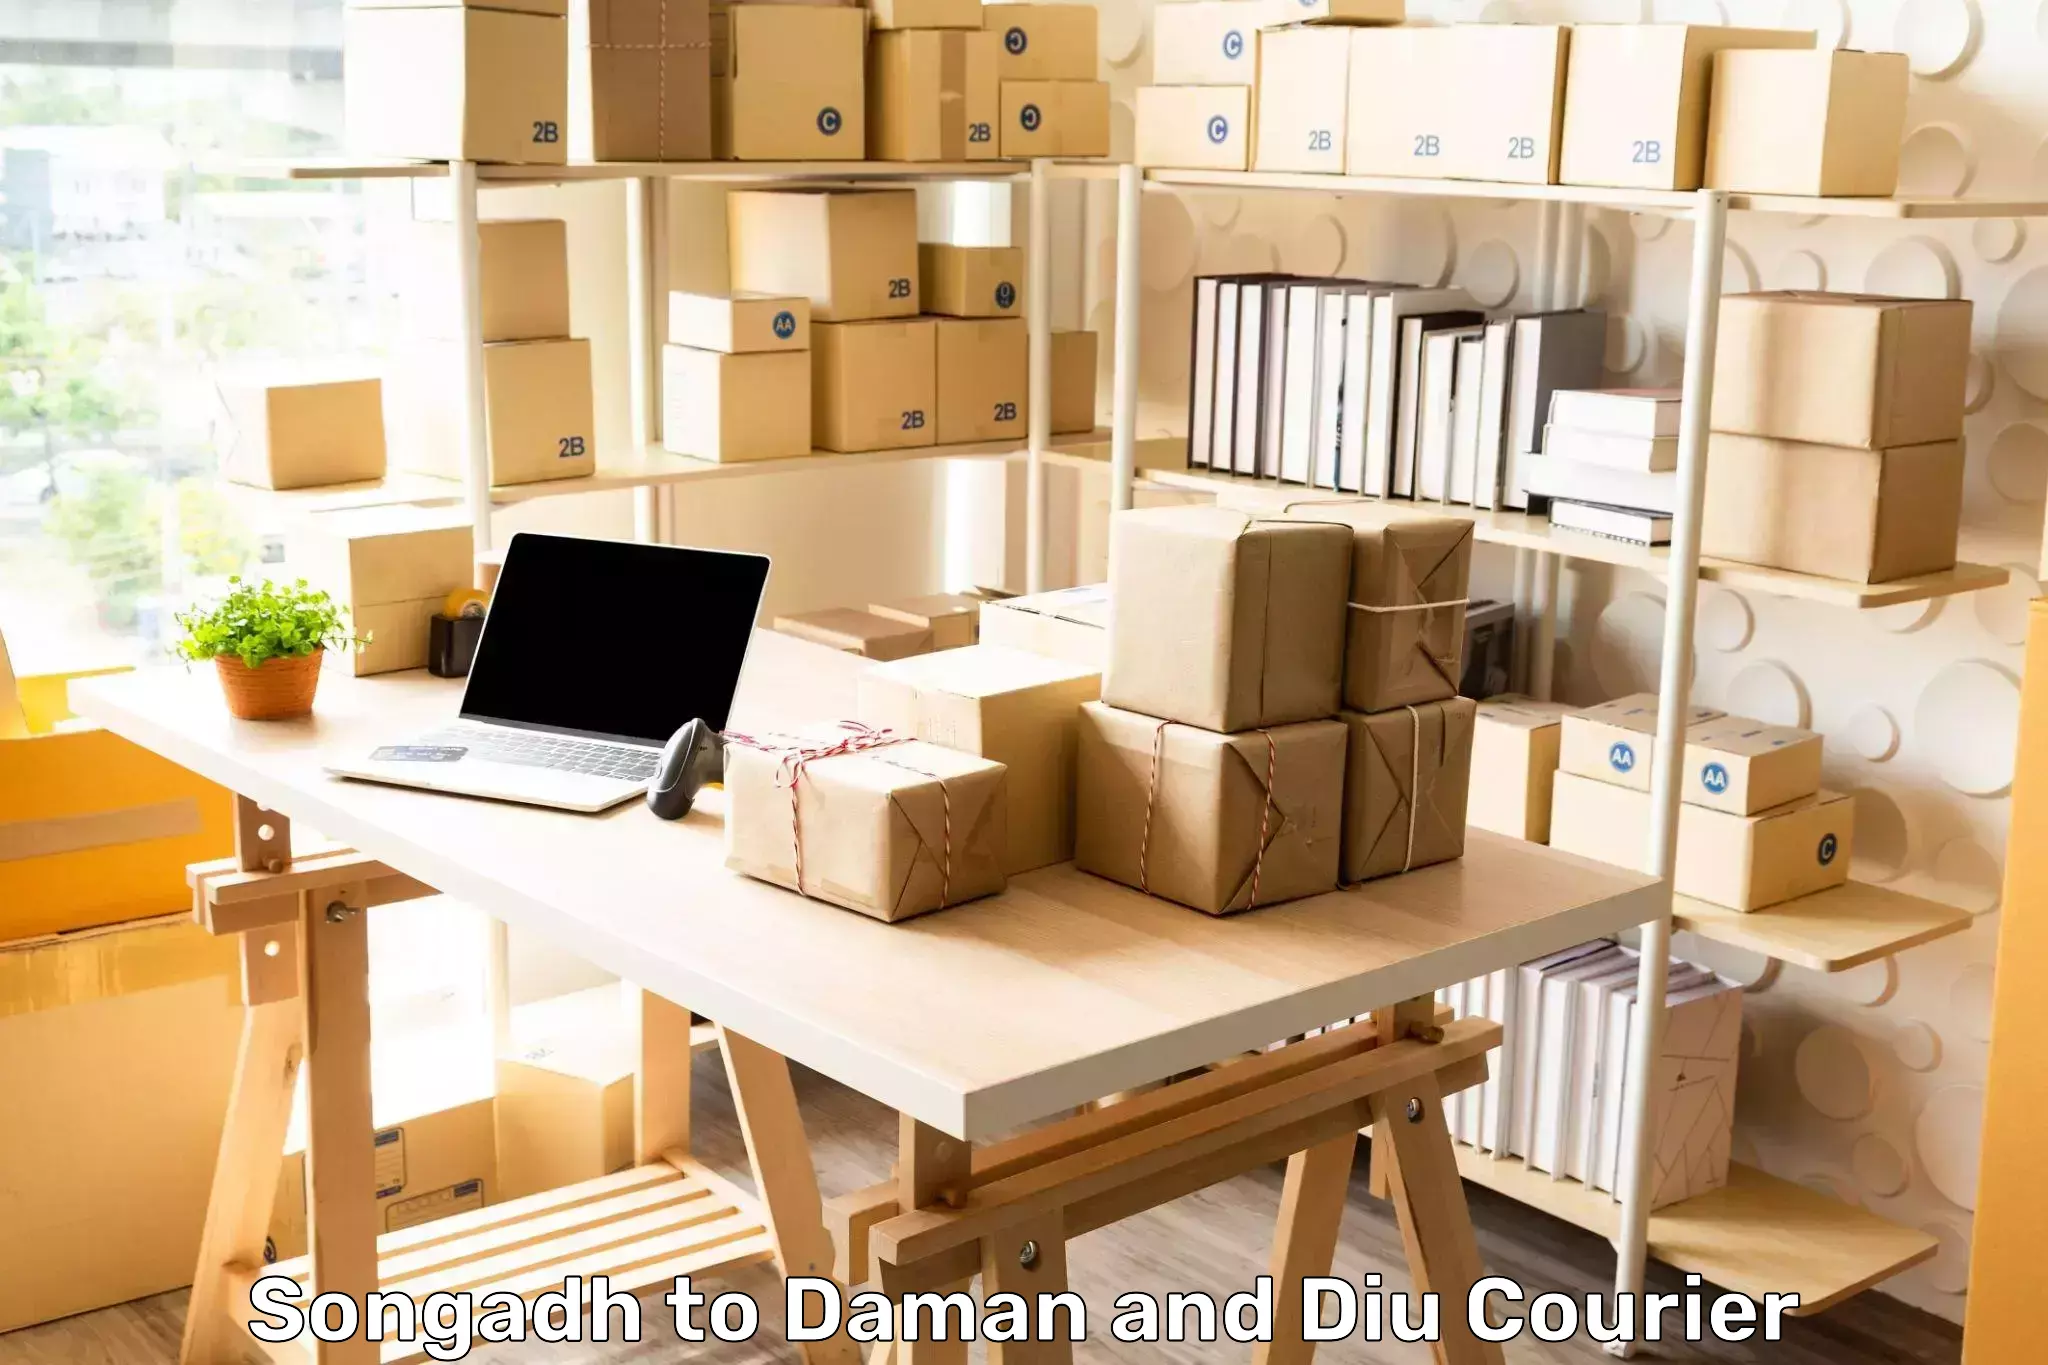 Business courier solutions Songadh to Daman and Diu